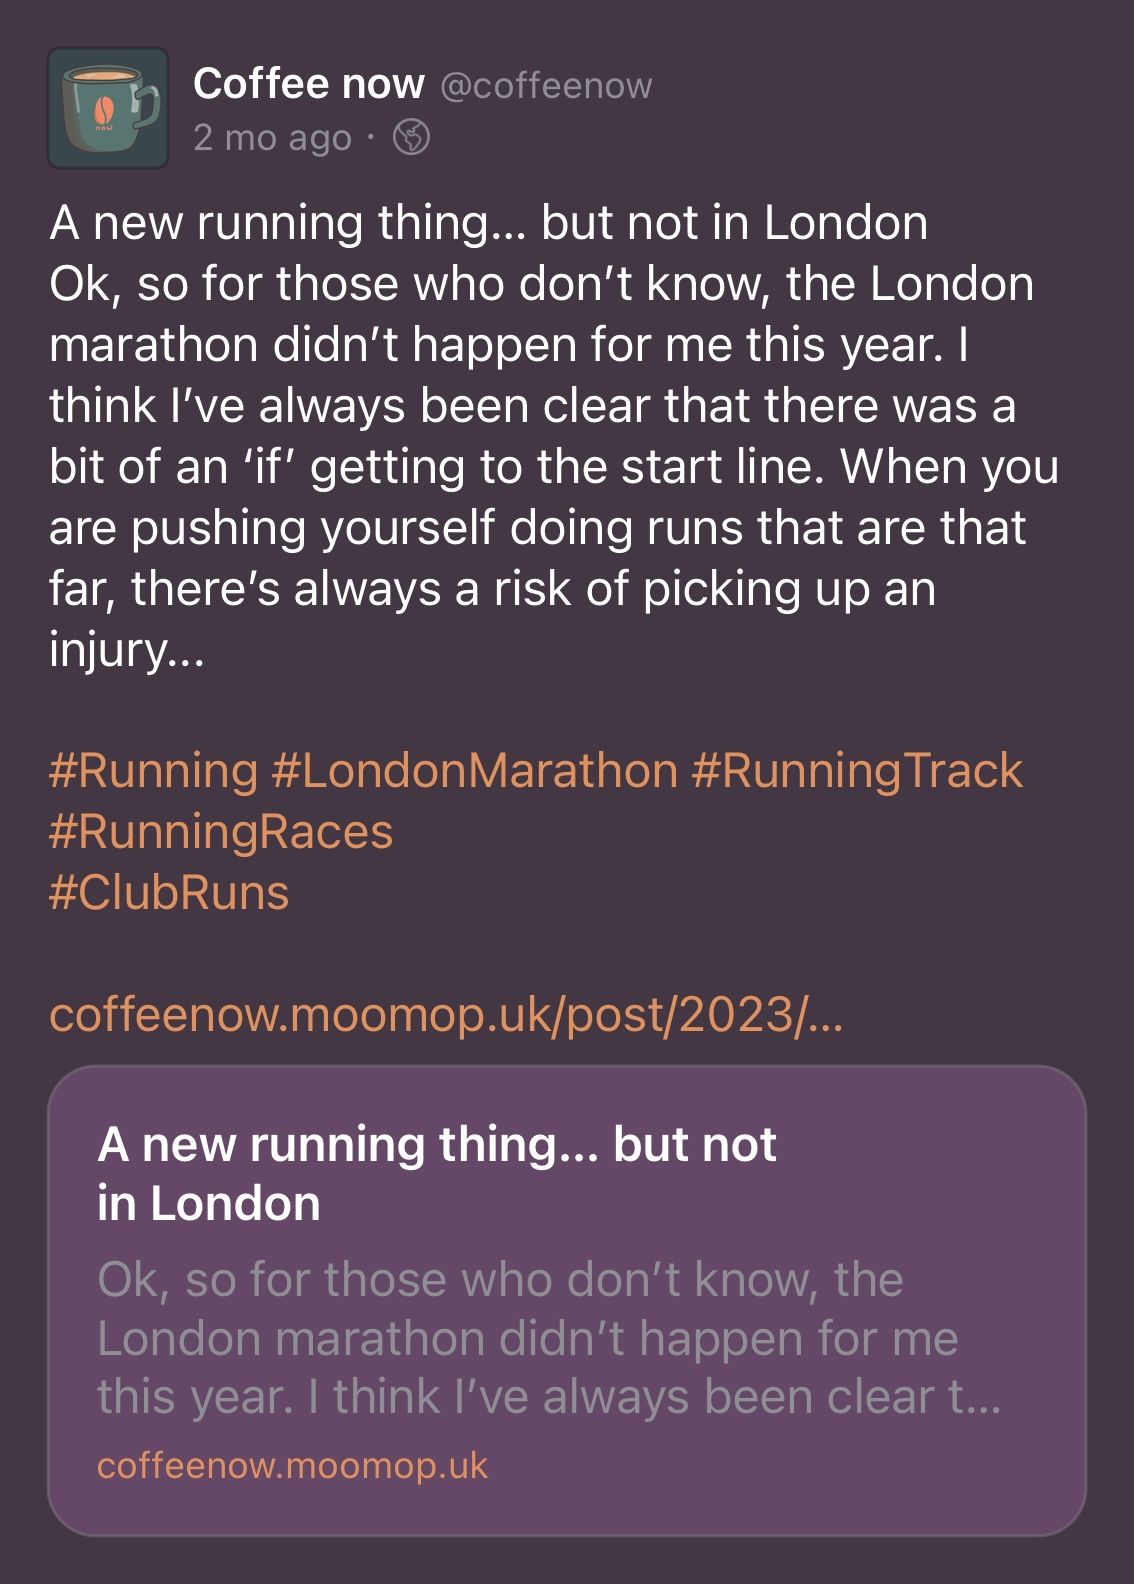 Screenshot of mastodon post for coffee now ''A new running thing... but not in London Ok, so for those who don't know, the London marathon didn't happen for me this year. I think I've always been clear that there was a bit of an 'if' getting to the start line. When you are pushing yourself doing runs that are that far, there's always a risk of picking up an injury...'